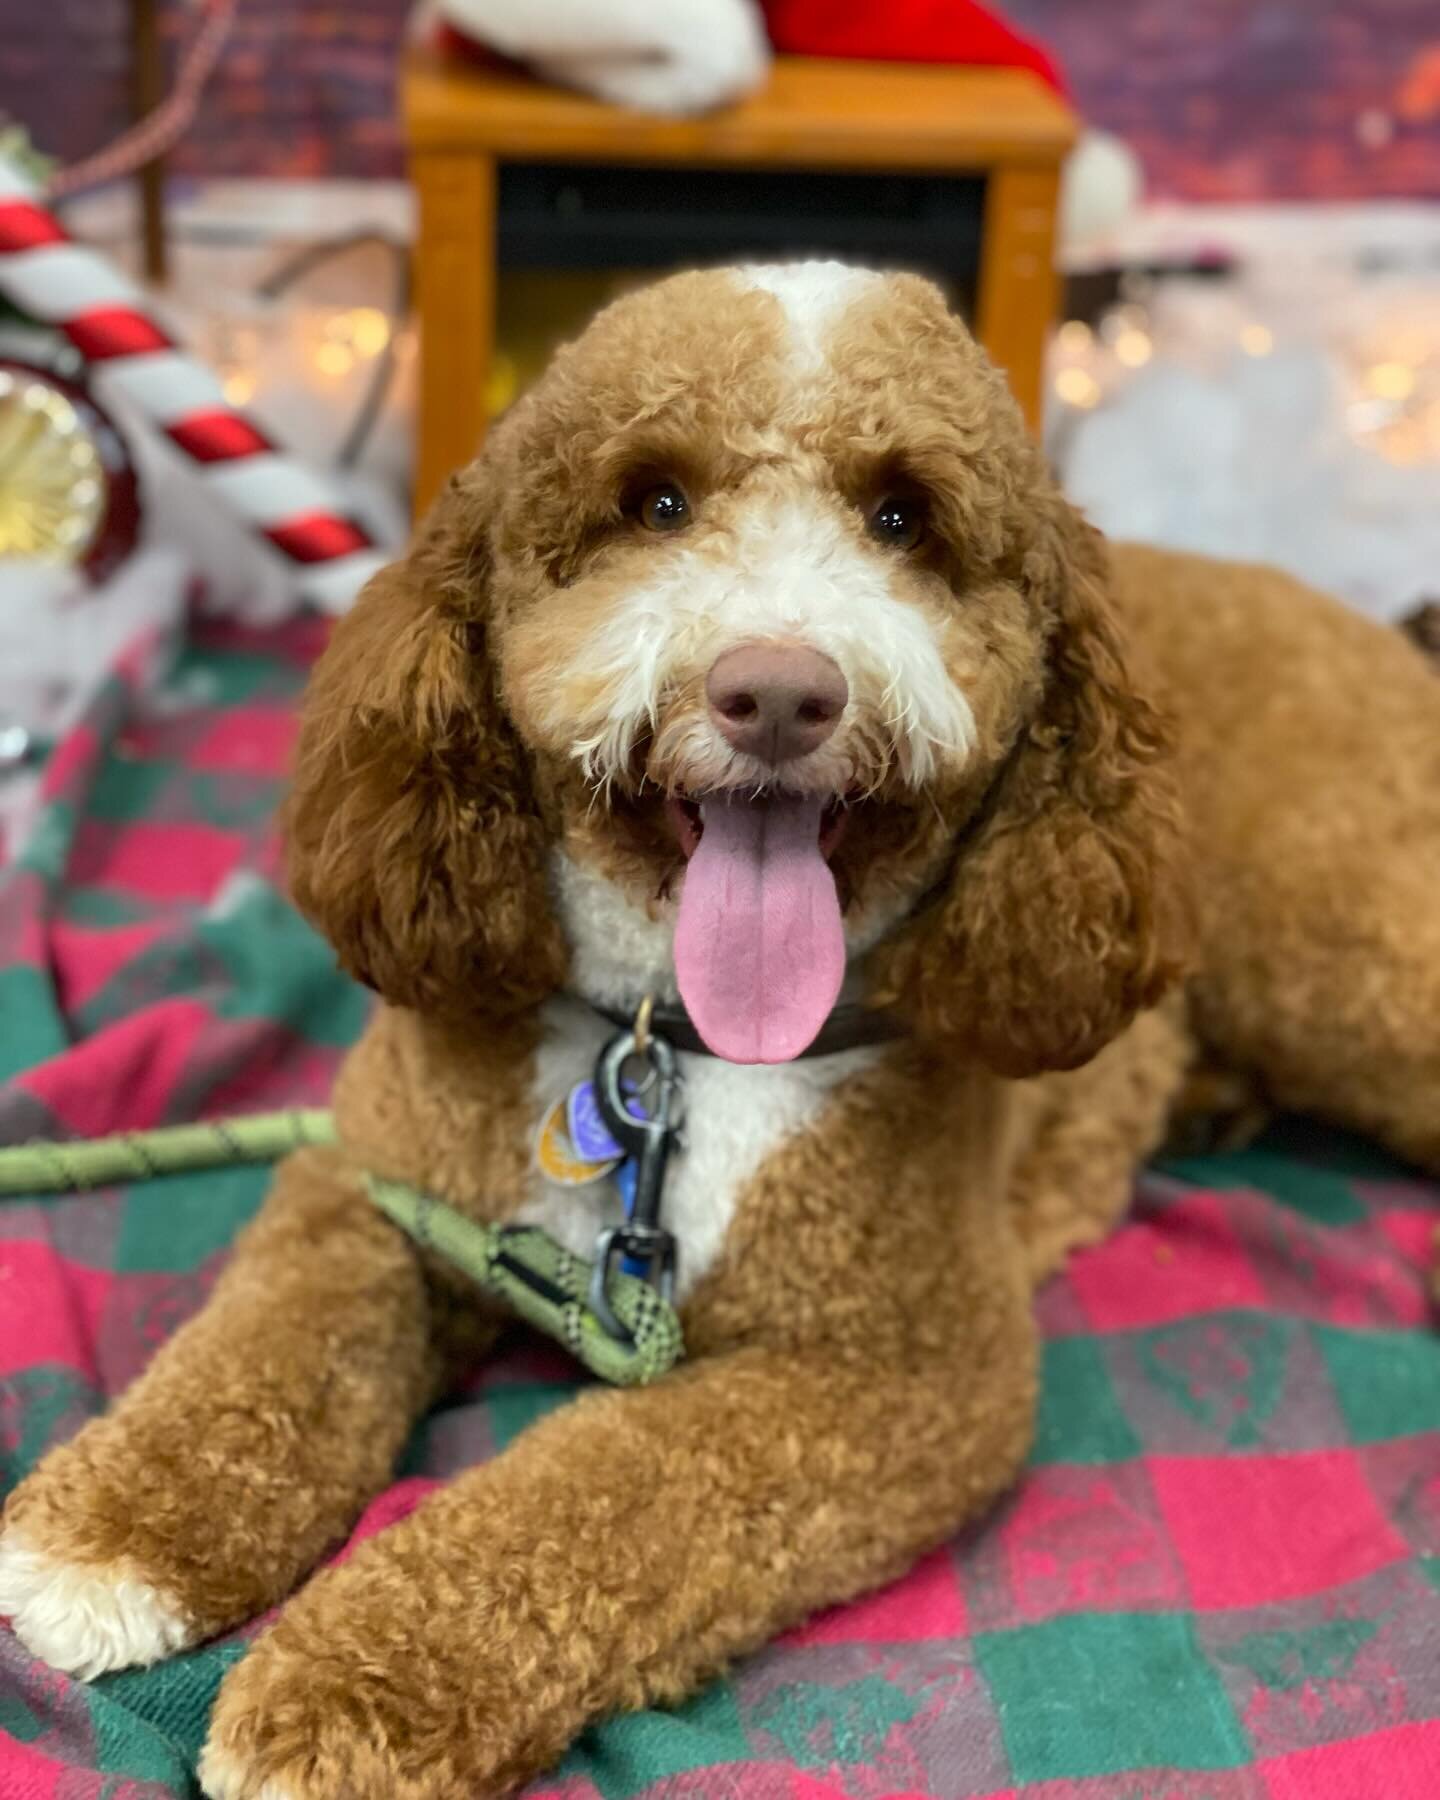 Toby looks so happy after his PAWsome spa day 🤩
Swipe ➡️ to see the before&hellip;
#thepetcabaret #doggrooming #dogsofinstagram #dogs #doodle #doodlesofboston #doodles #petgrooming #doggyspaday